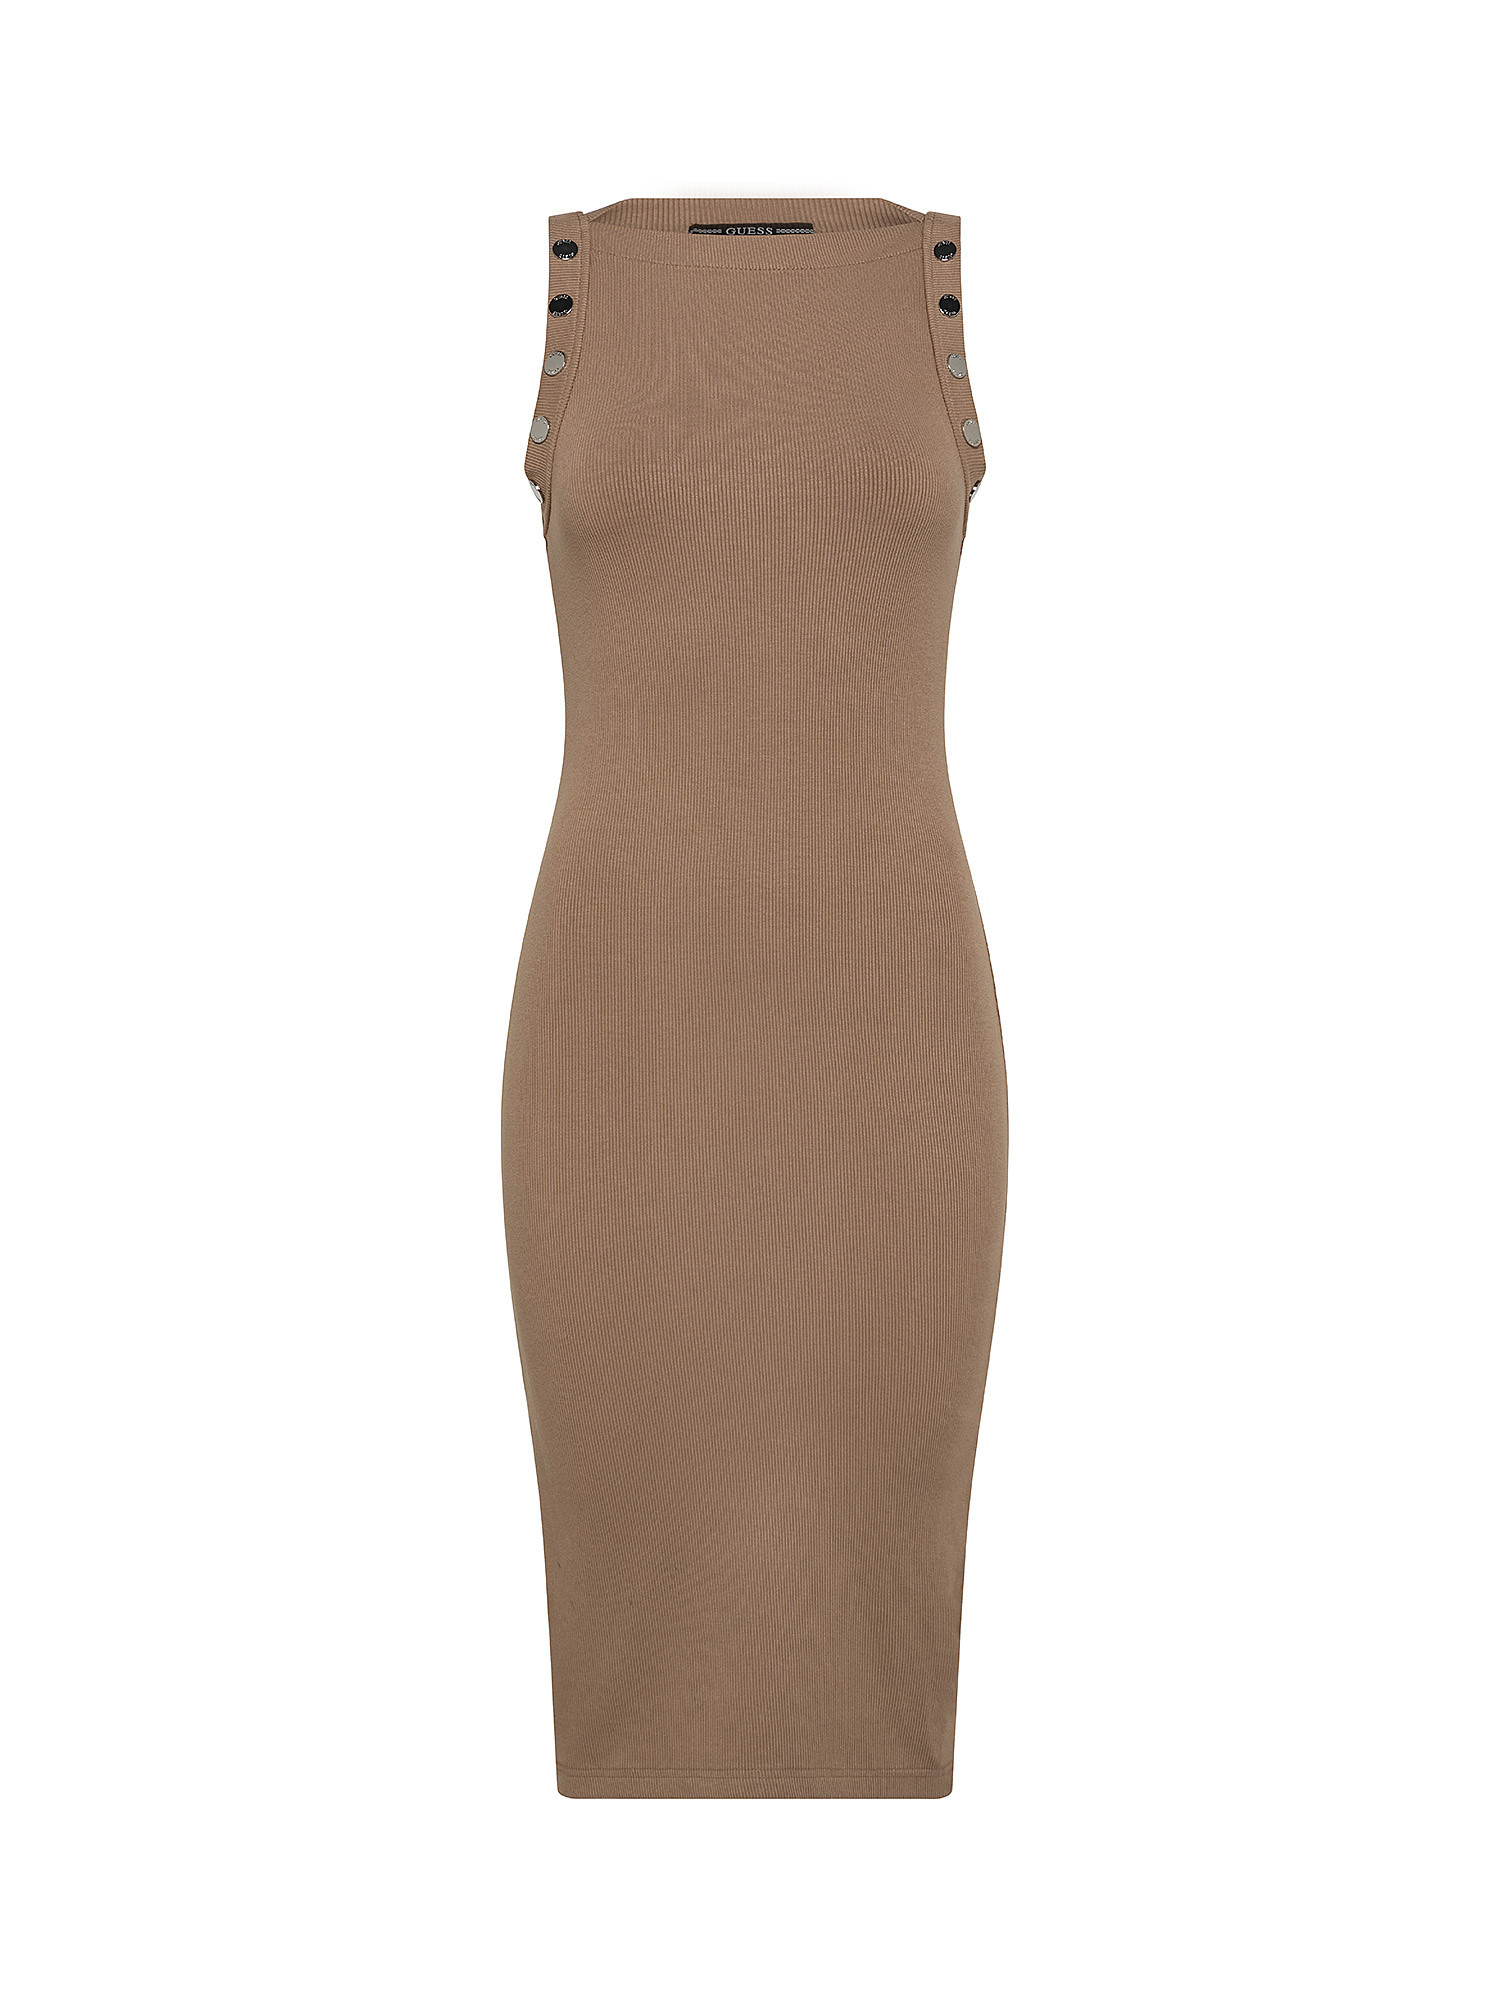 Abito costine bodycon, Beige scuro, large image number 0